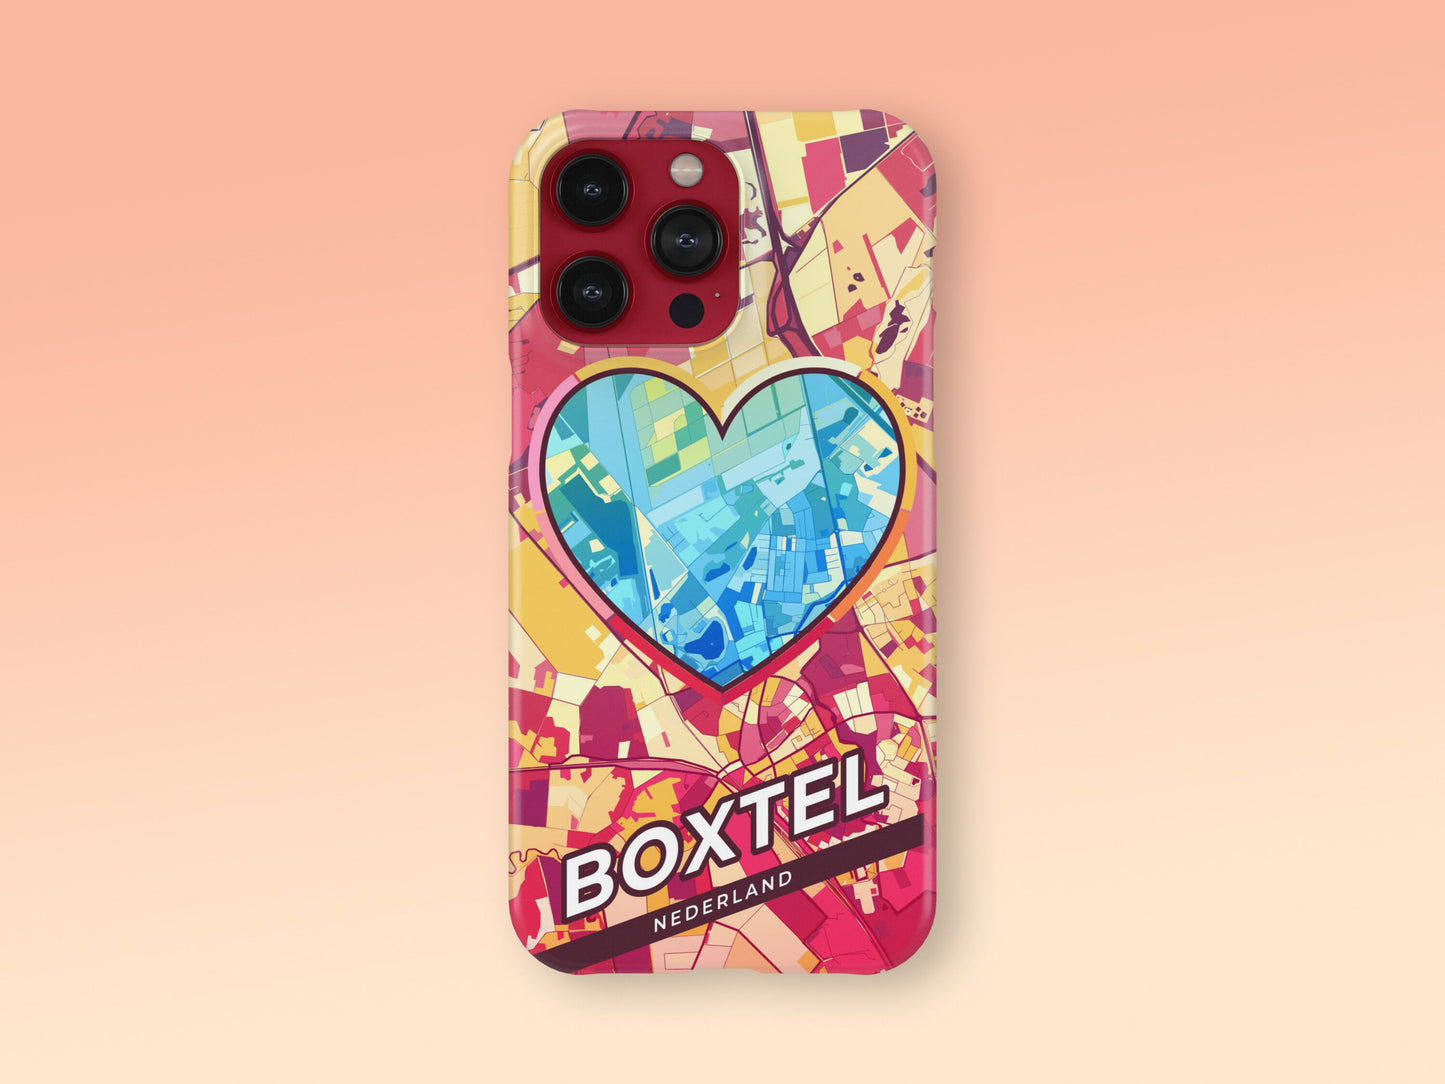 Boxtel Netherlands slim phone case with colorful icon. Birthday, wedding or housewarming gift. Couple match cases. 2